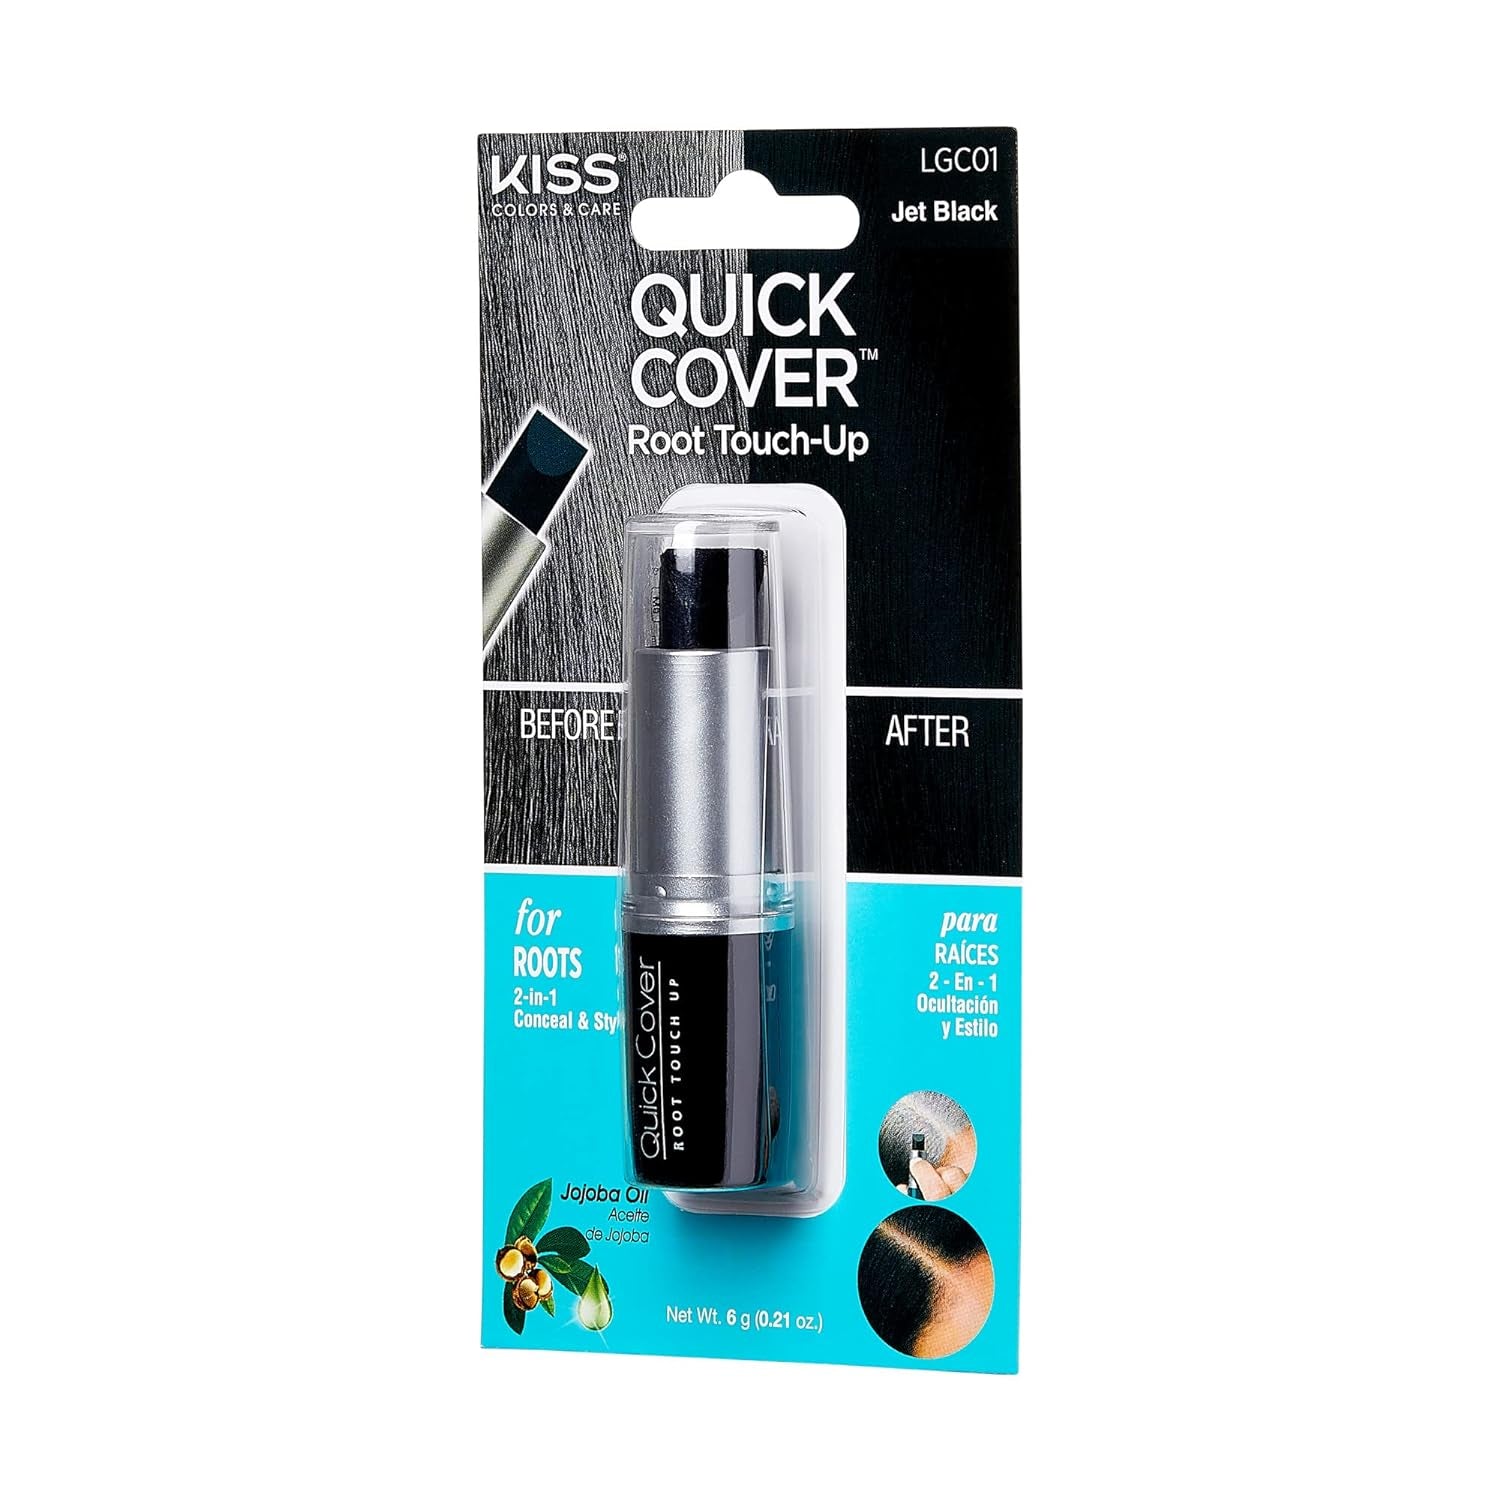 RED by  Quick Cover Root Touch up Stick Type Water-Resistant Temporary Gray Concealer Cover up Brush for Hair and Beard (Jet Black)